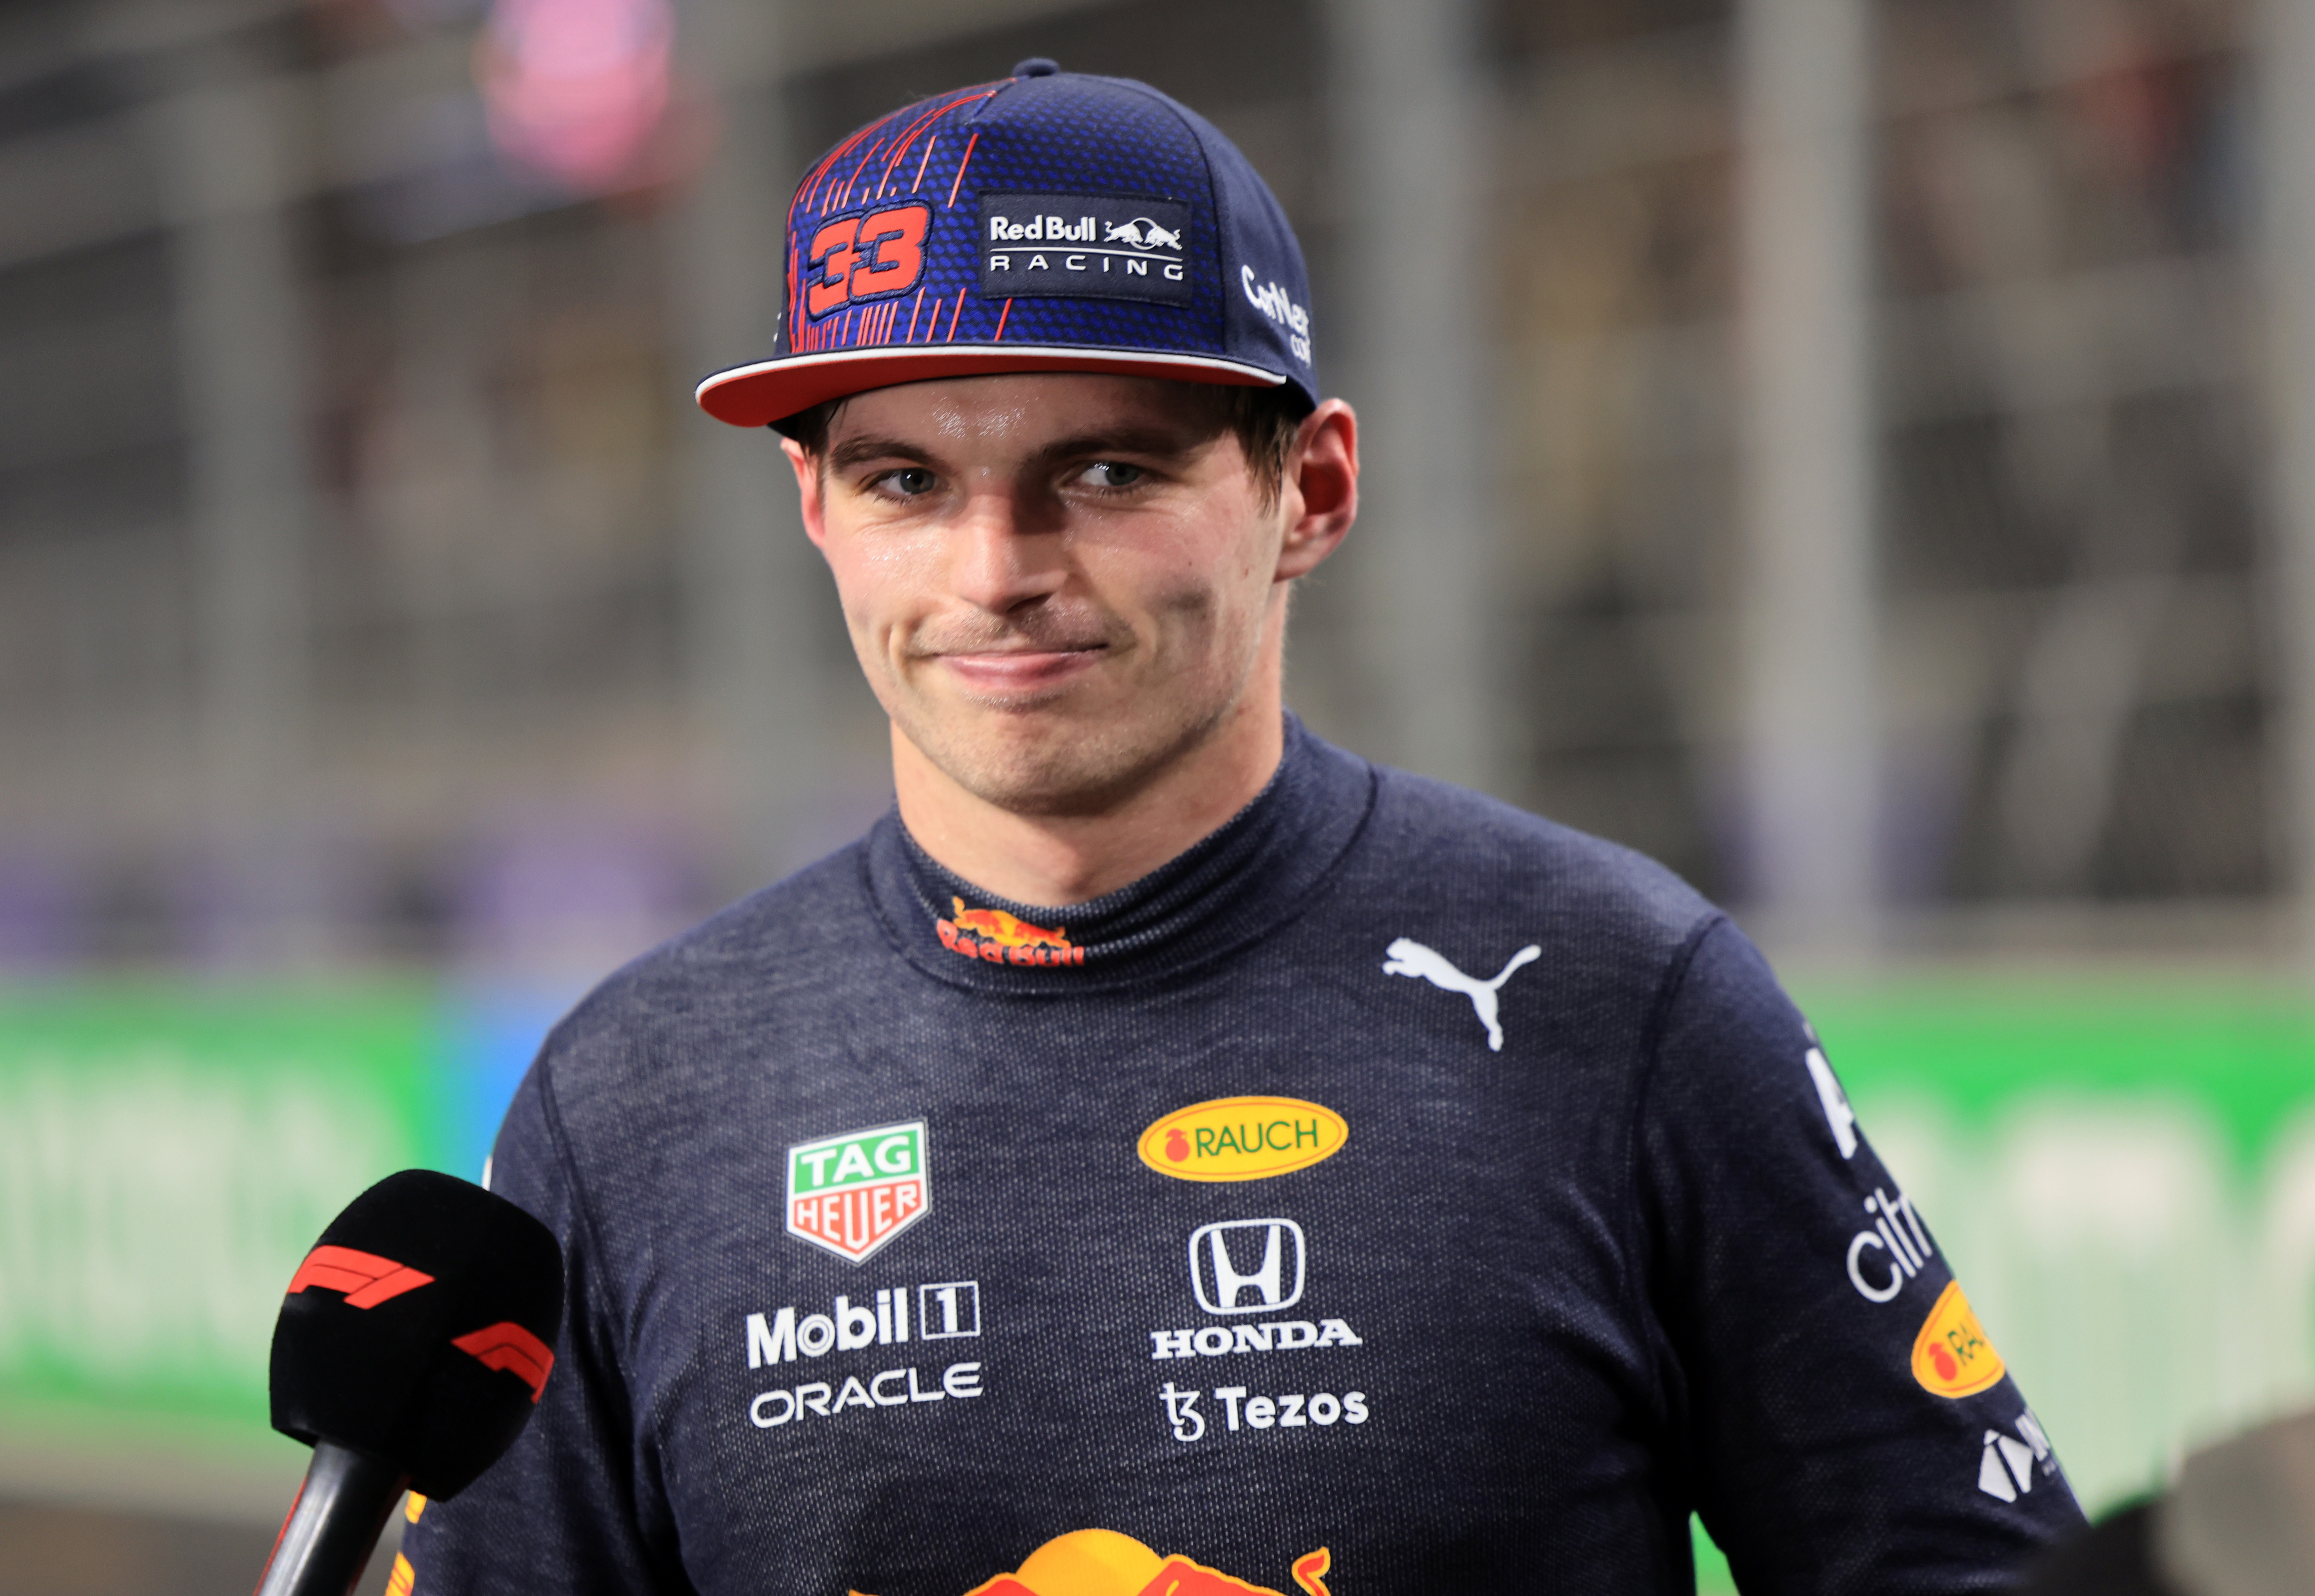 Formula One F1- Saudi Arabian Grand Prix - Jeddah Corniche Circuit, Jeddah, Saudi Arabia - December 4, 2021 Red Bull's Max Verstappen is interviewed after qualifying in third position Pool via REUTERS/Giuseppe Cacace